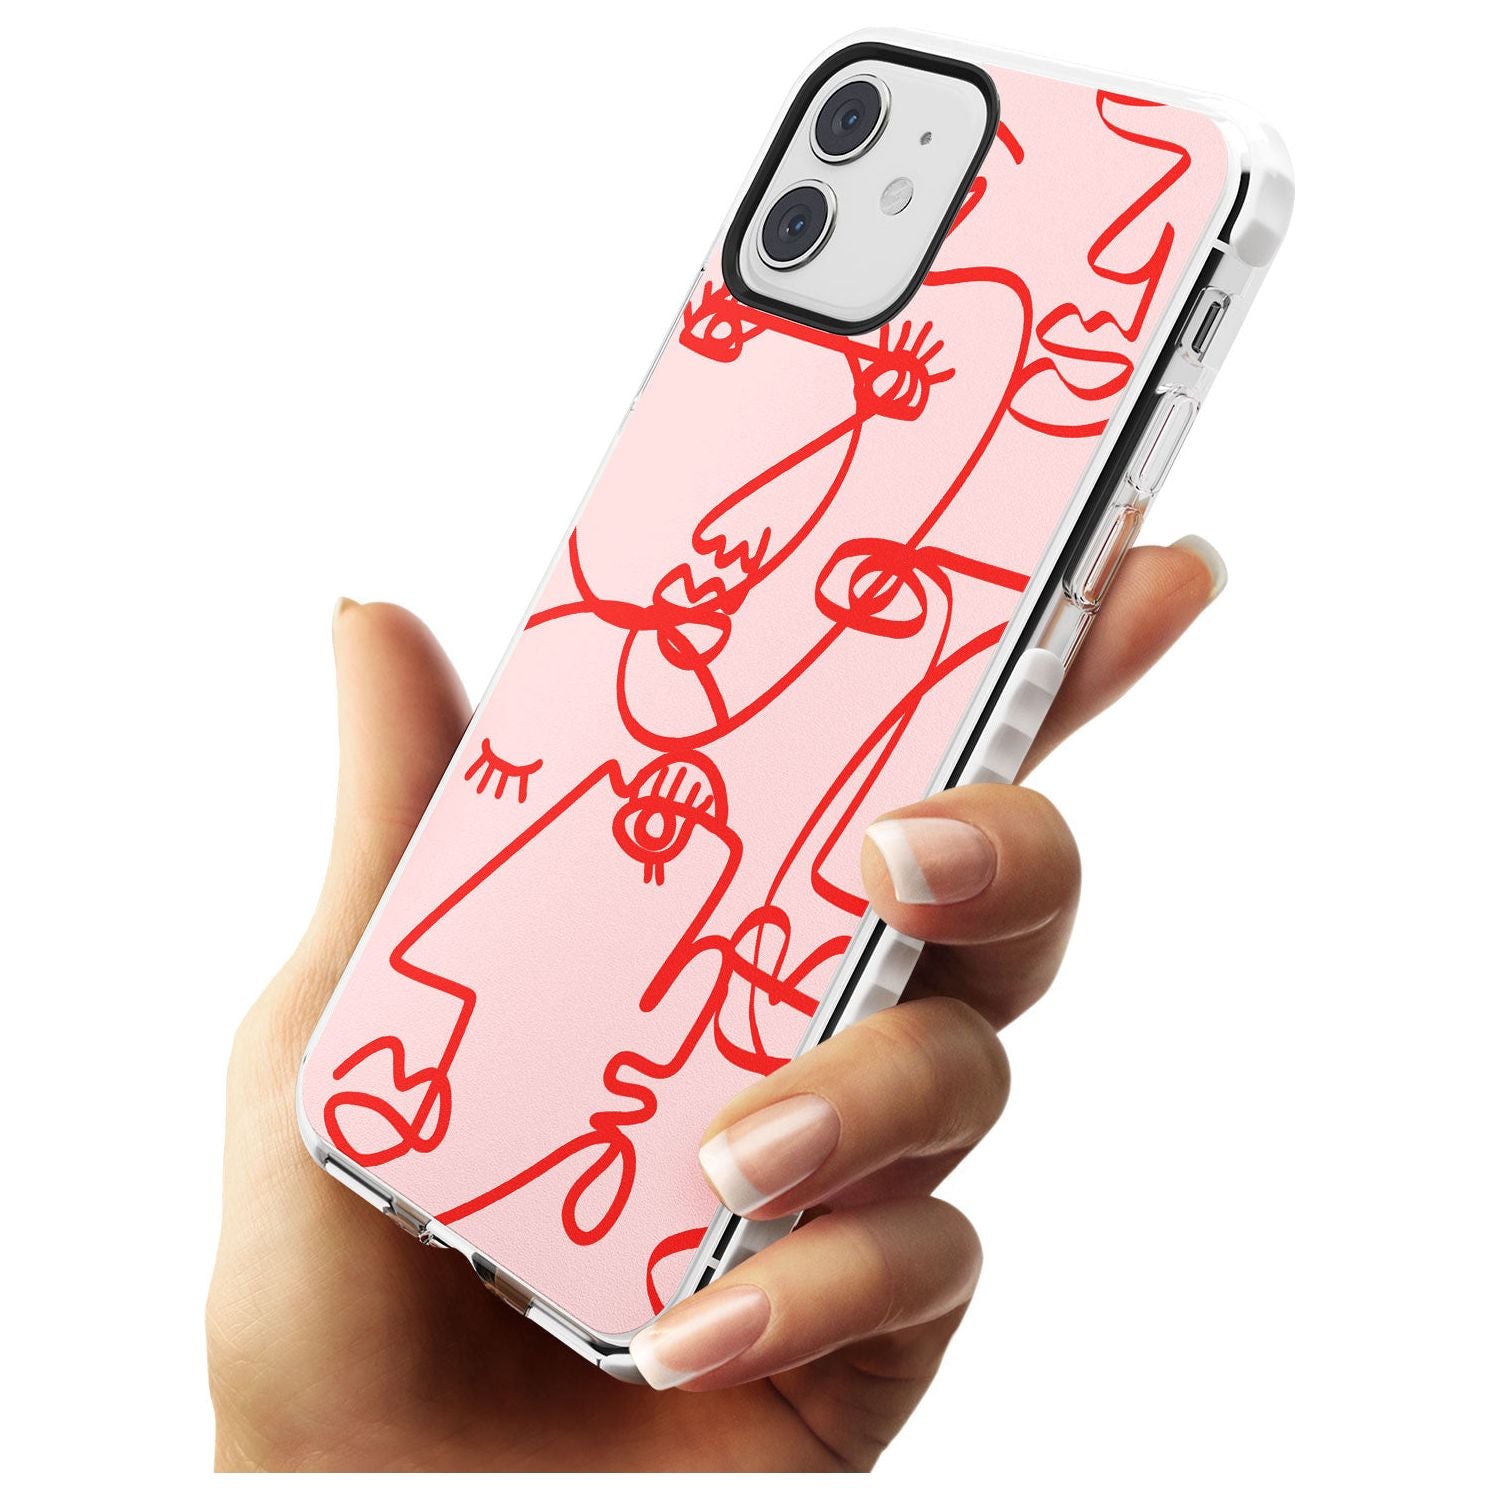 Continuous Line Faces: Red on Pink Slim TPU Phone Case for iPhone 11